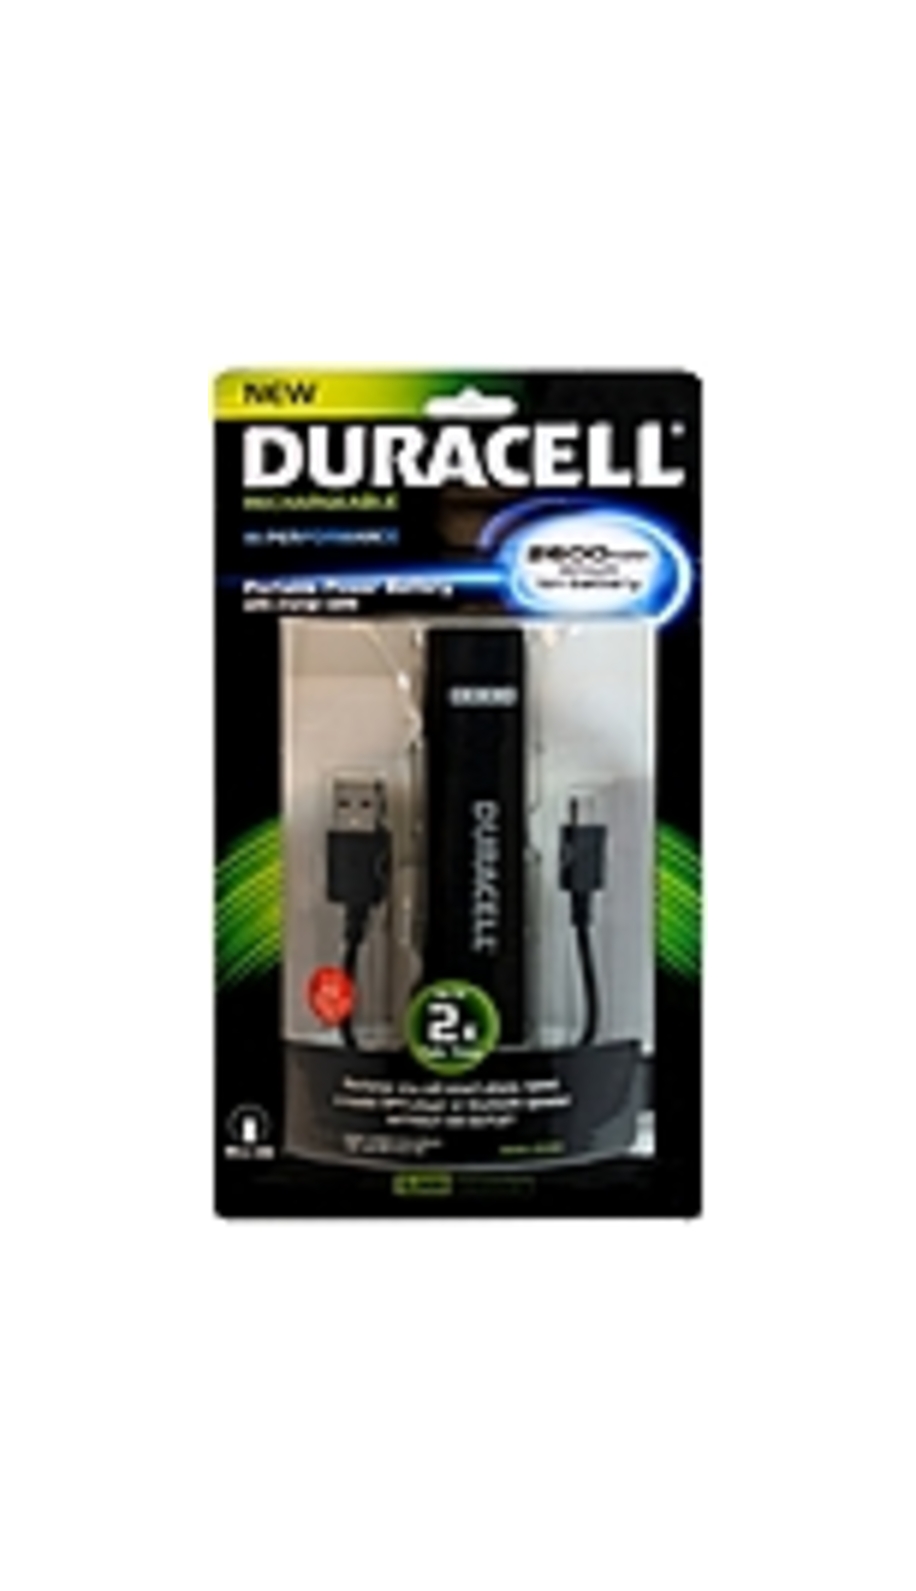 Duracell Power Bank - For Tablet PC, e-book Reader, MP3 Player, Bluetooth Speaker, Smartphone - Lithium Ion (Li-Ion) - 2600 mAh